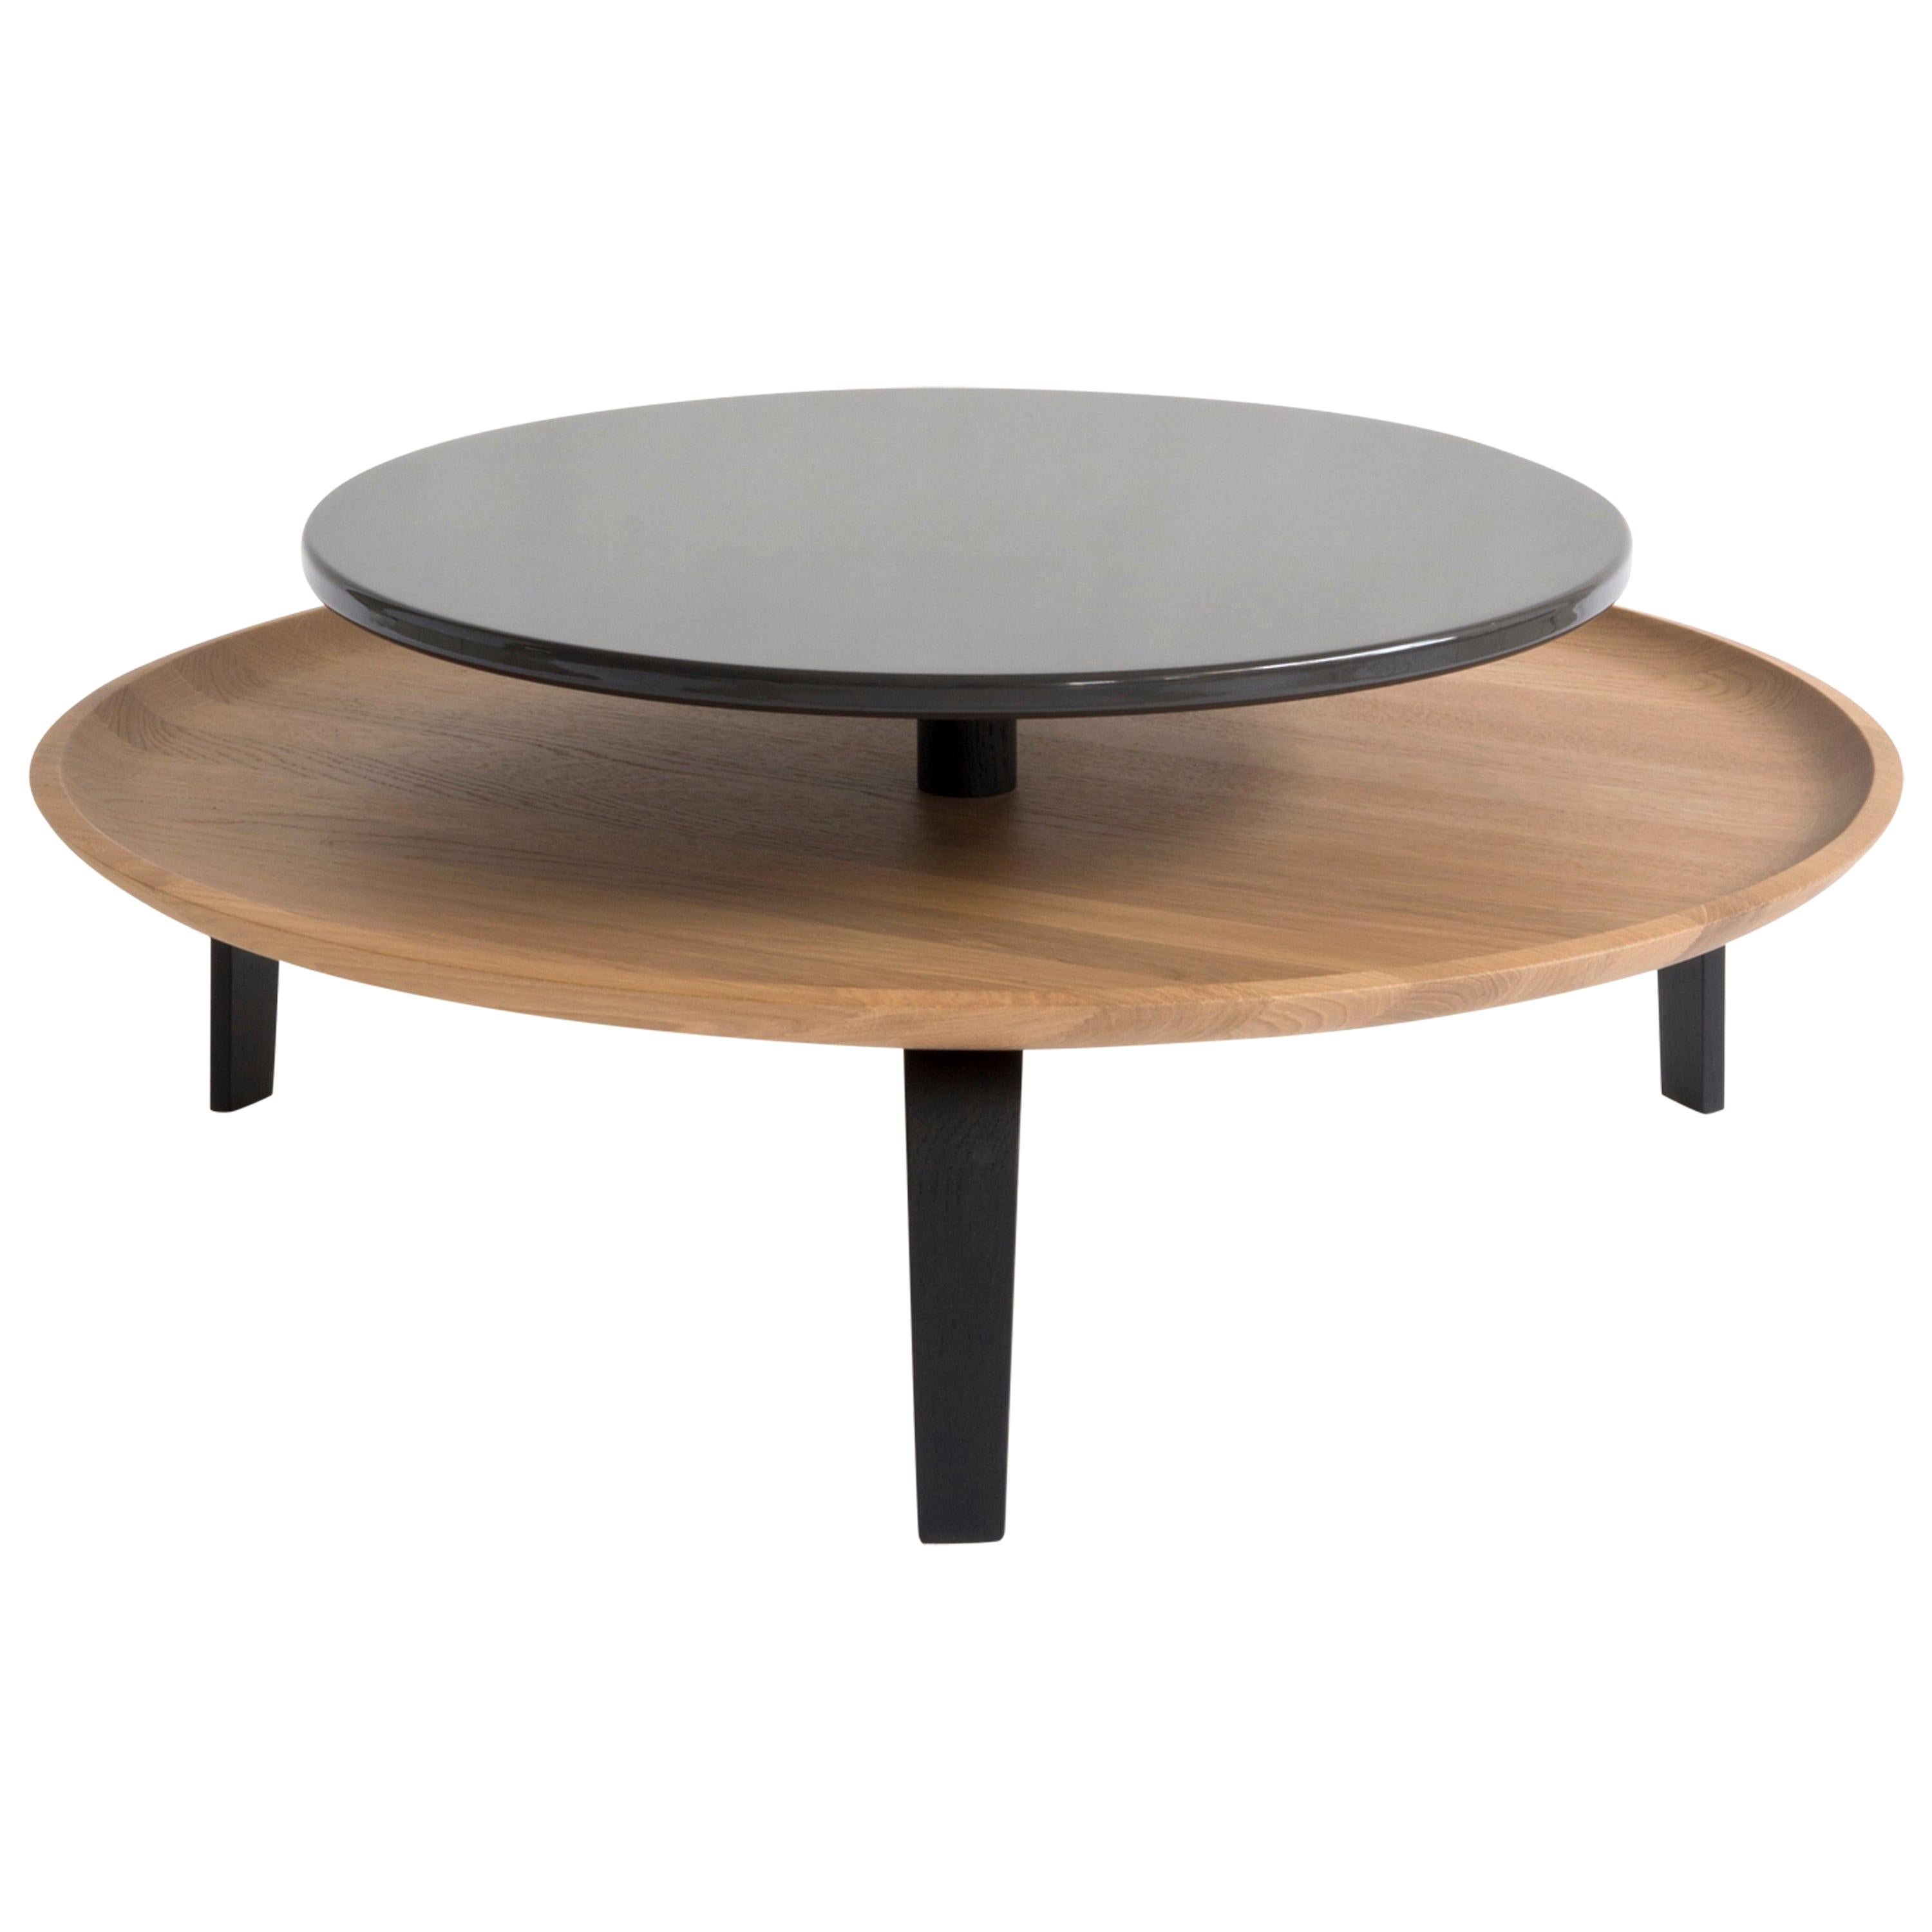 Secreto Round Coffee Table by Colé, Natural Oak and Black Lacquered Top